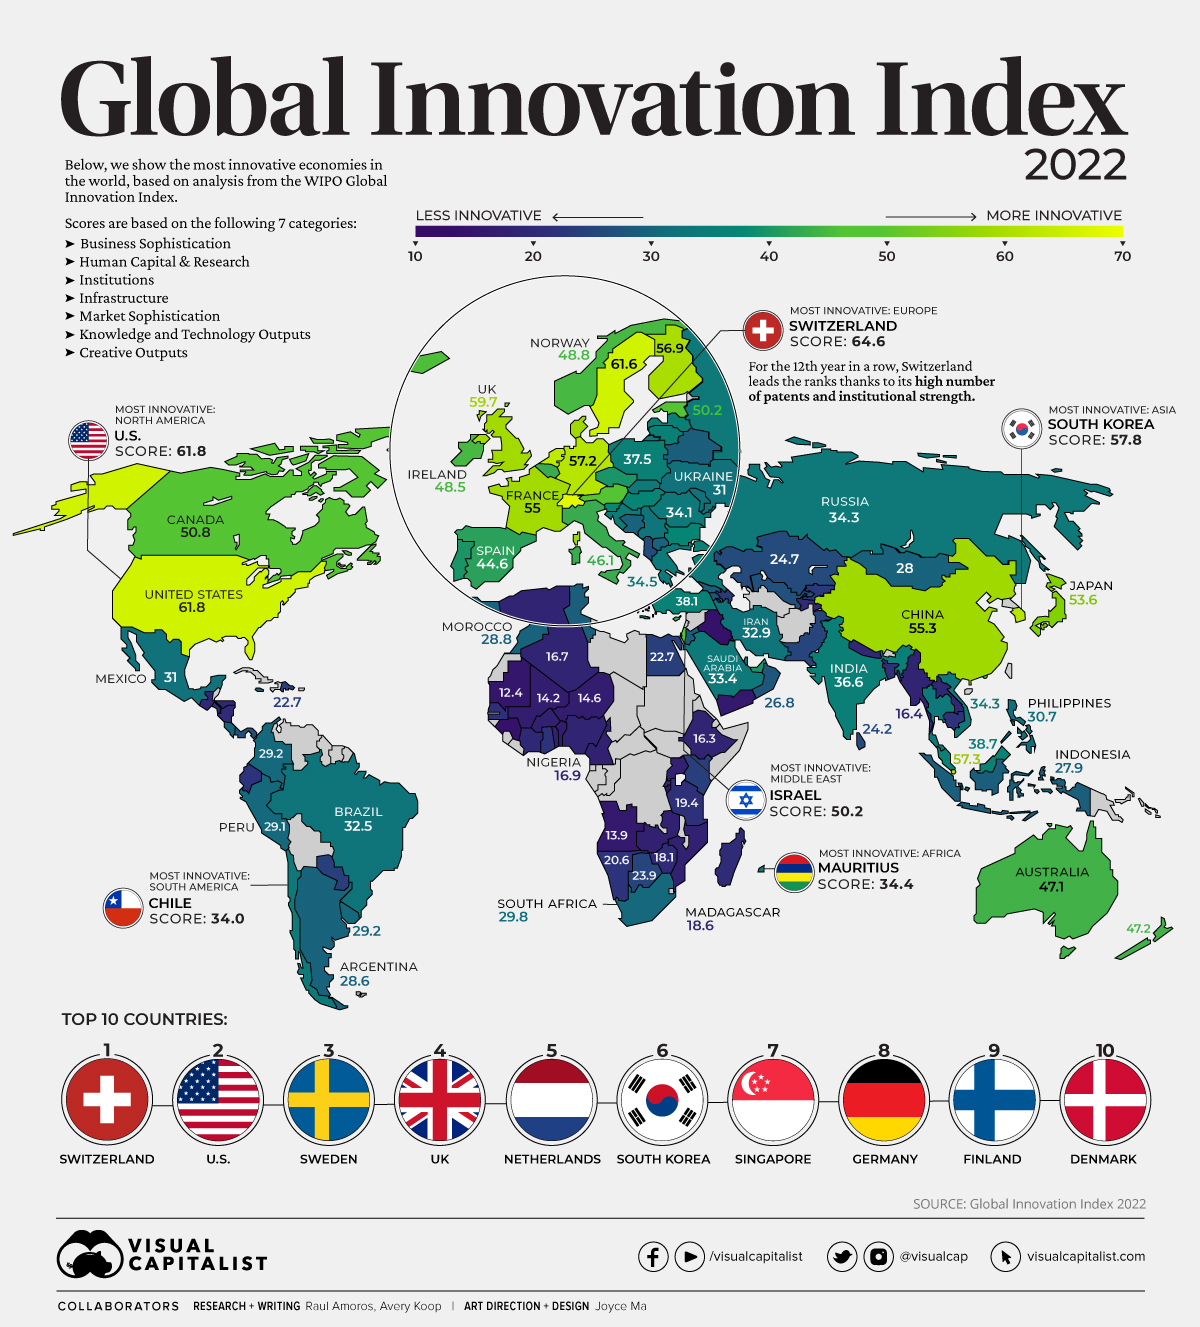 Mapped: The Most Innovative Countries in the World in 2022